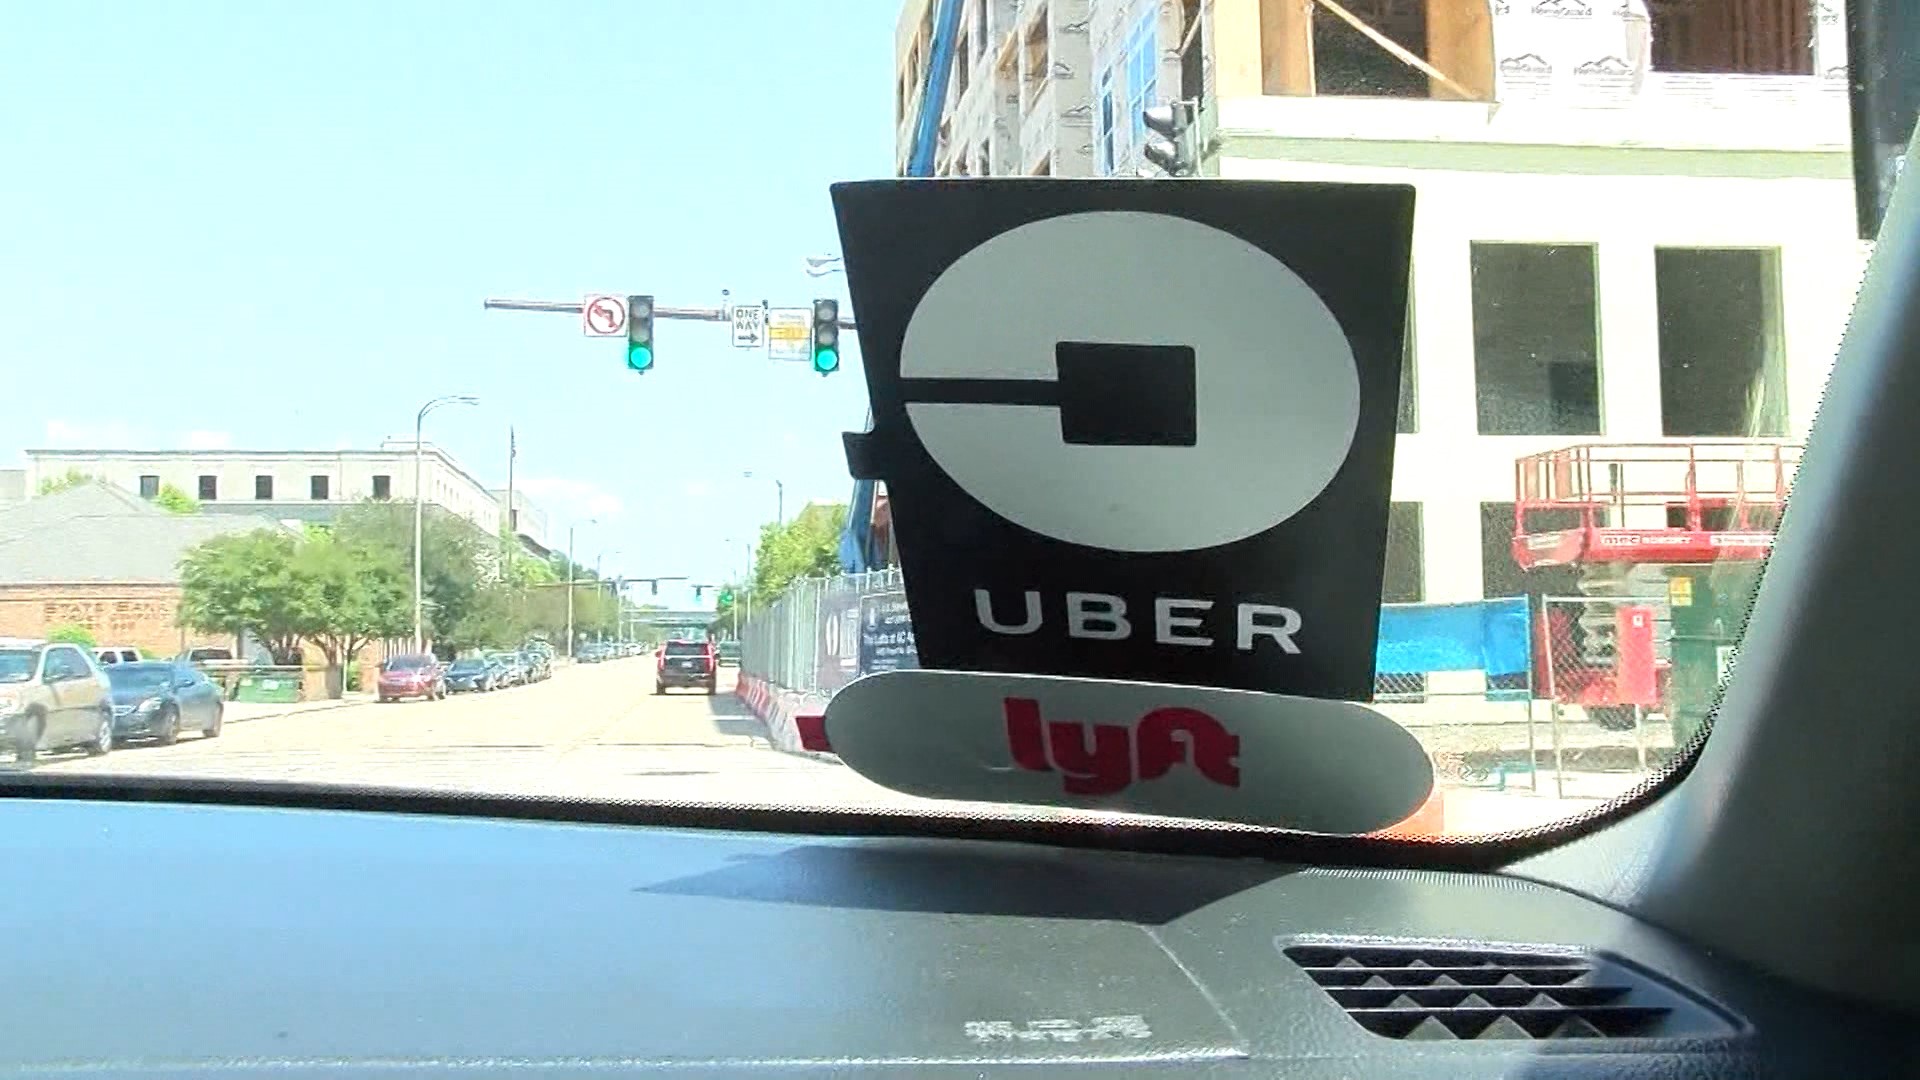 Proposition 22 would keep drivers as independent contractors rather than employees working for rideshare companies.